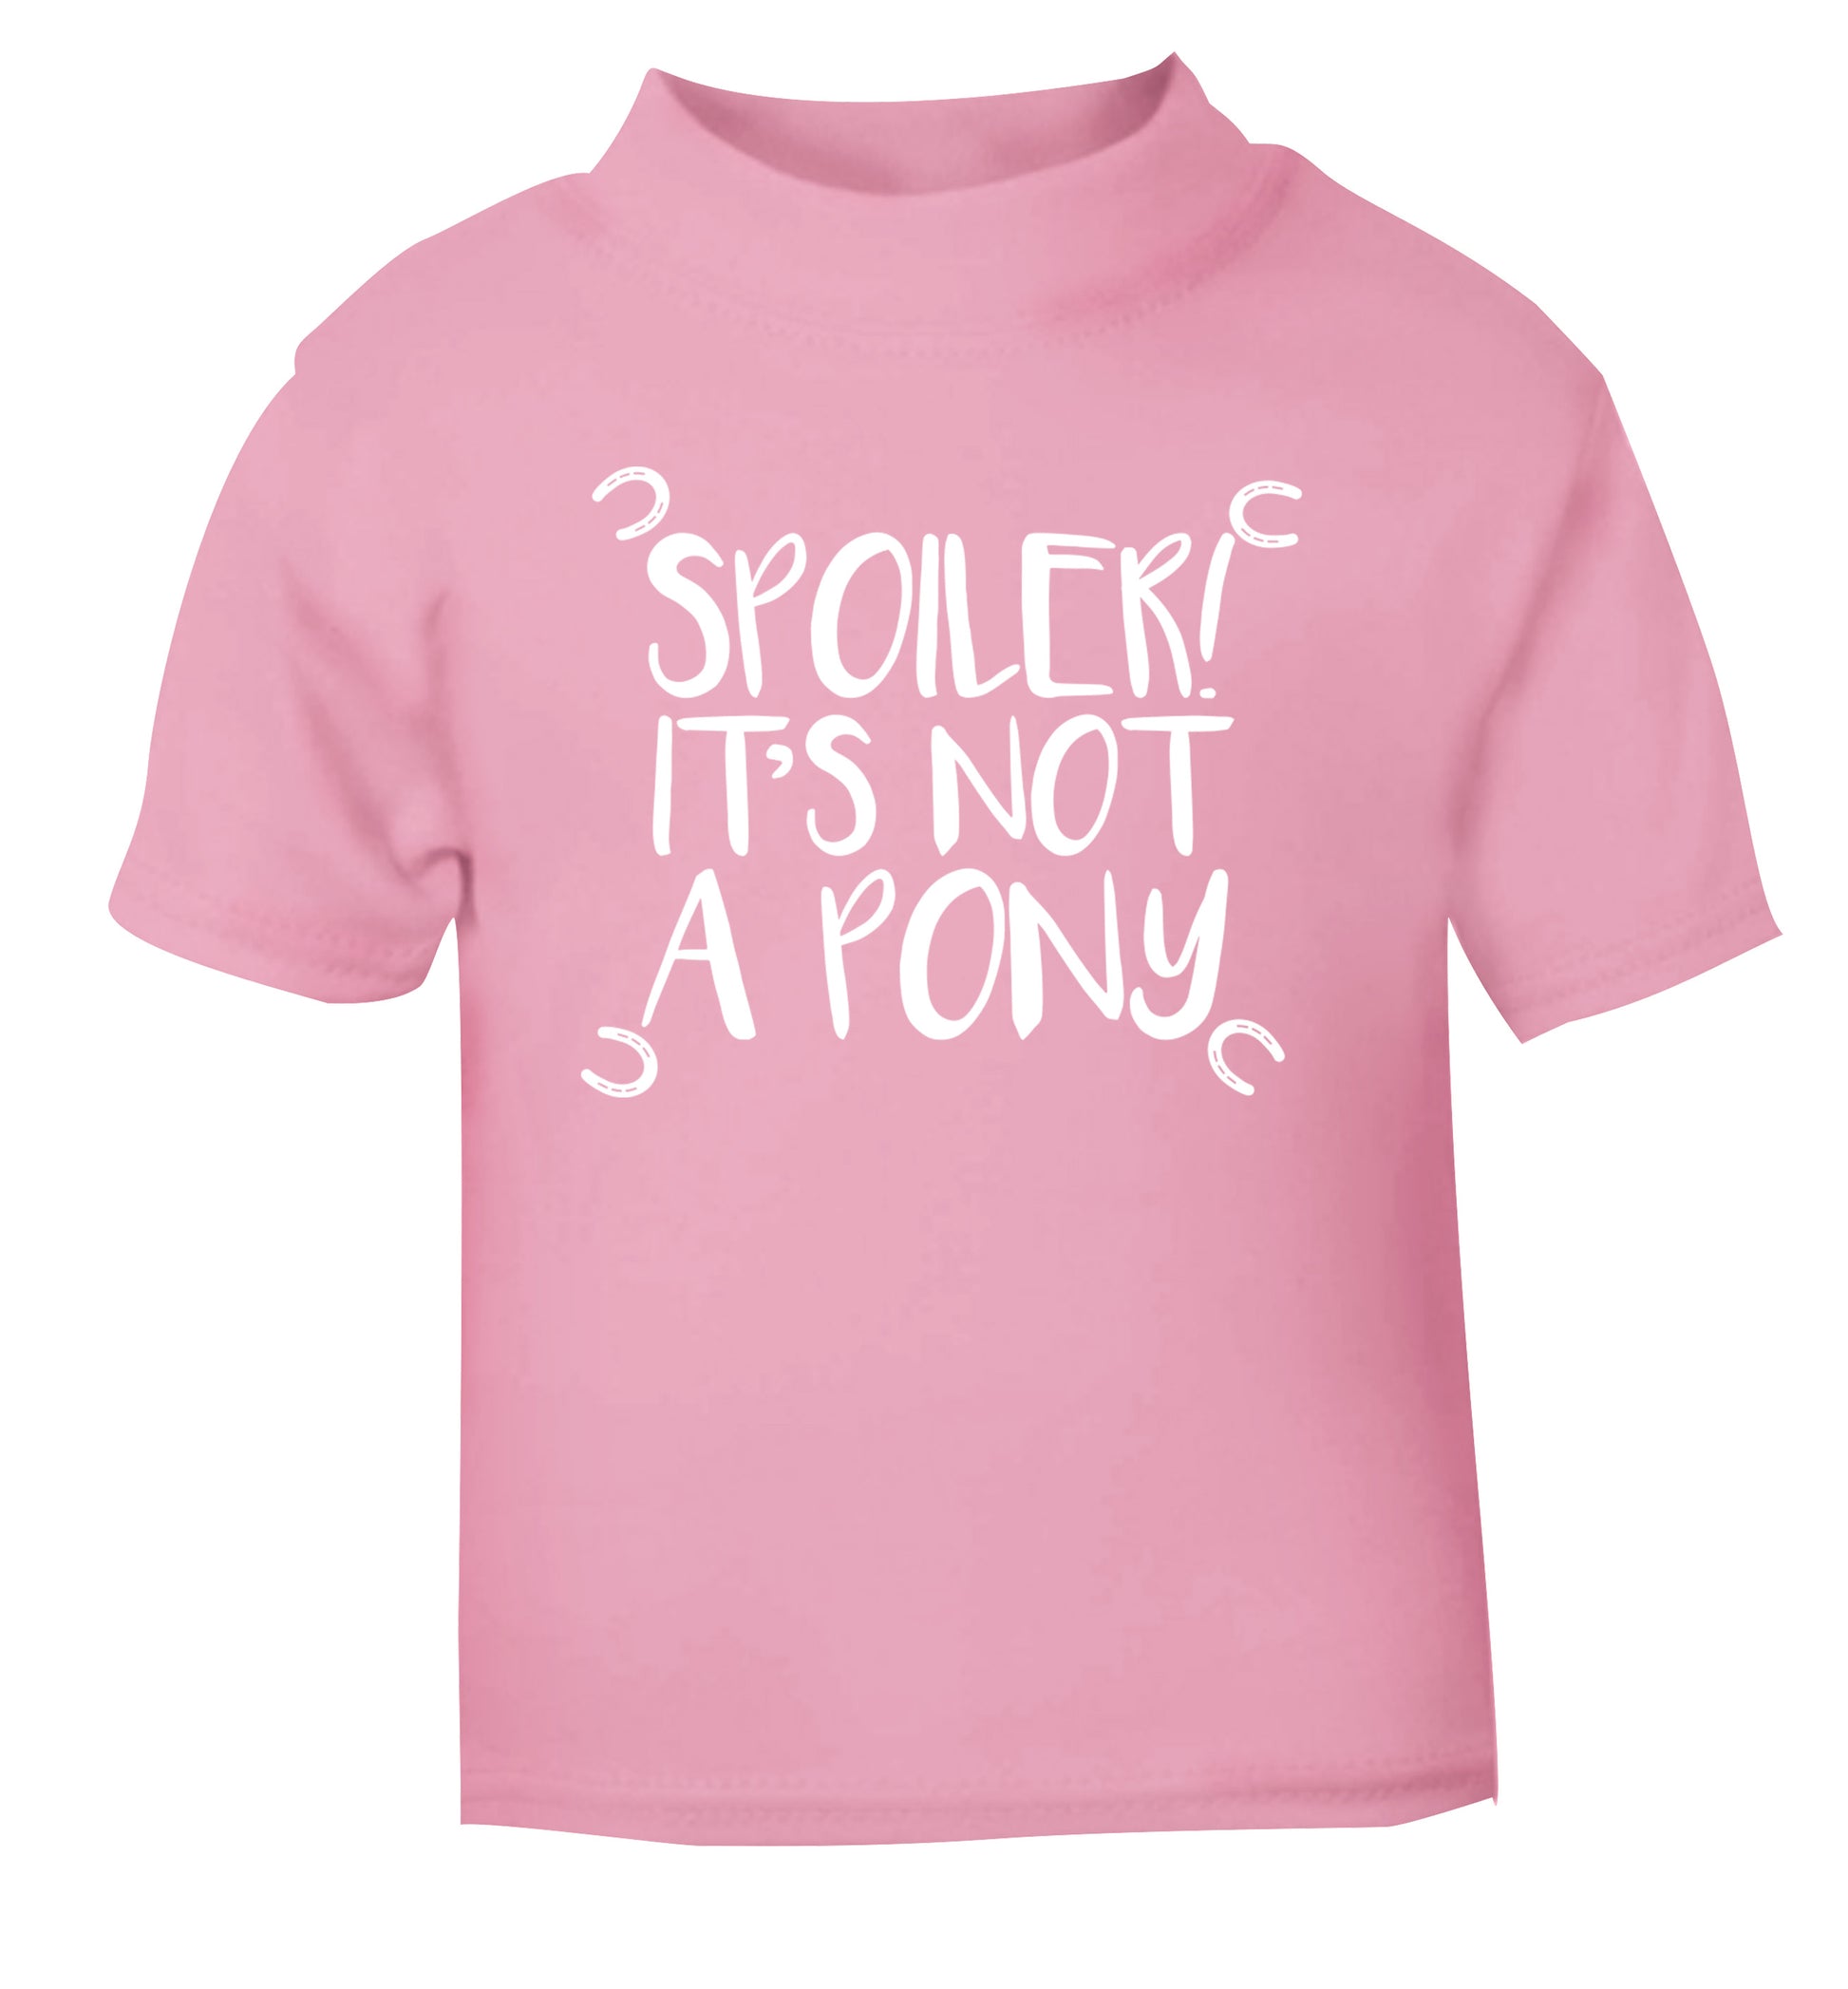 Spoiler it's not a pony light pink Baby Toddler Tshirt 2 Years